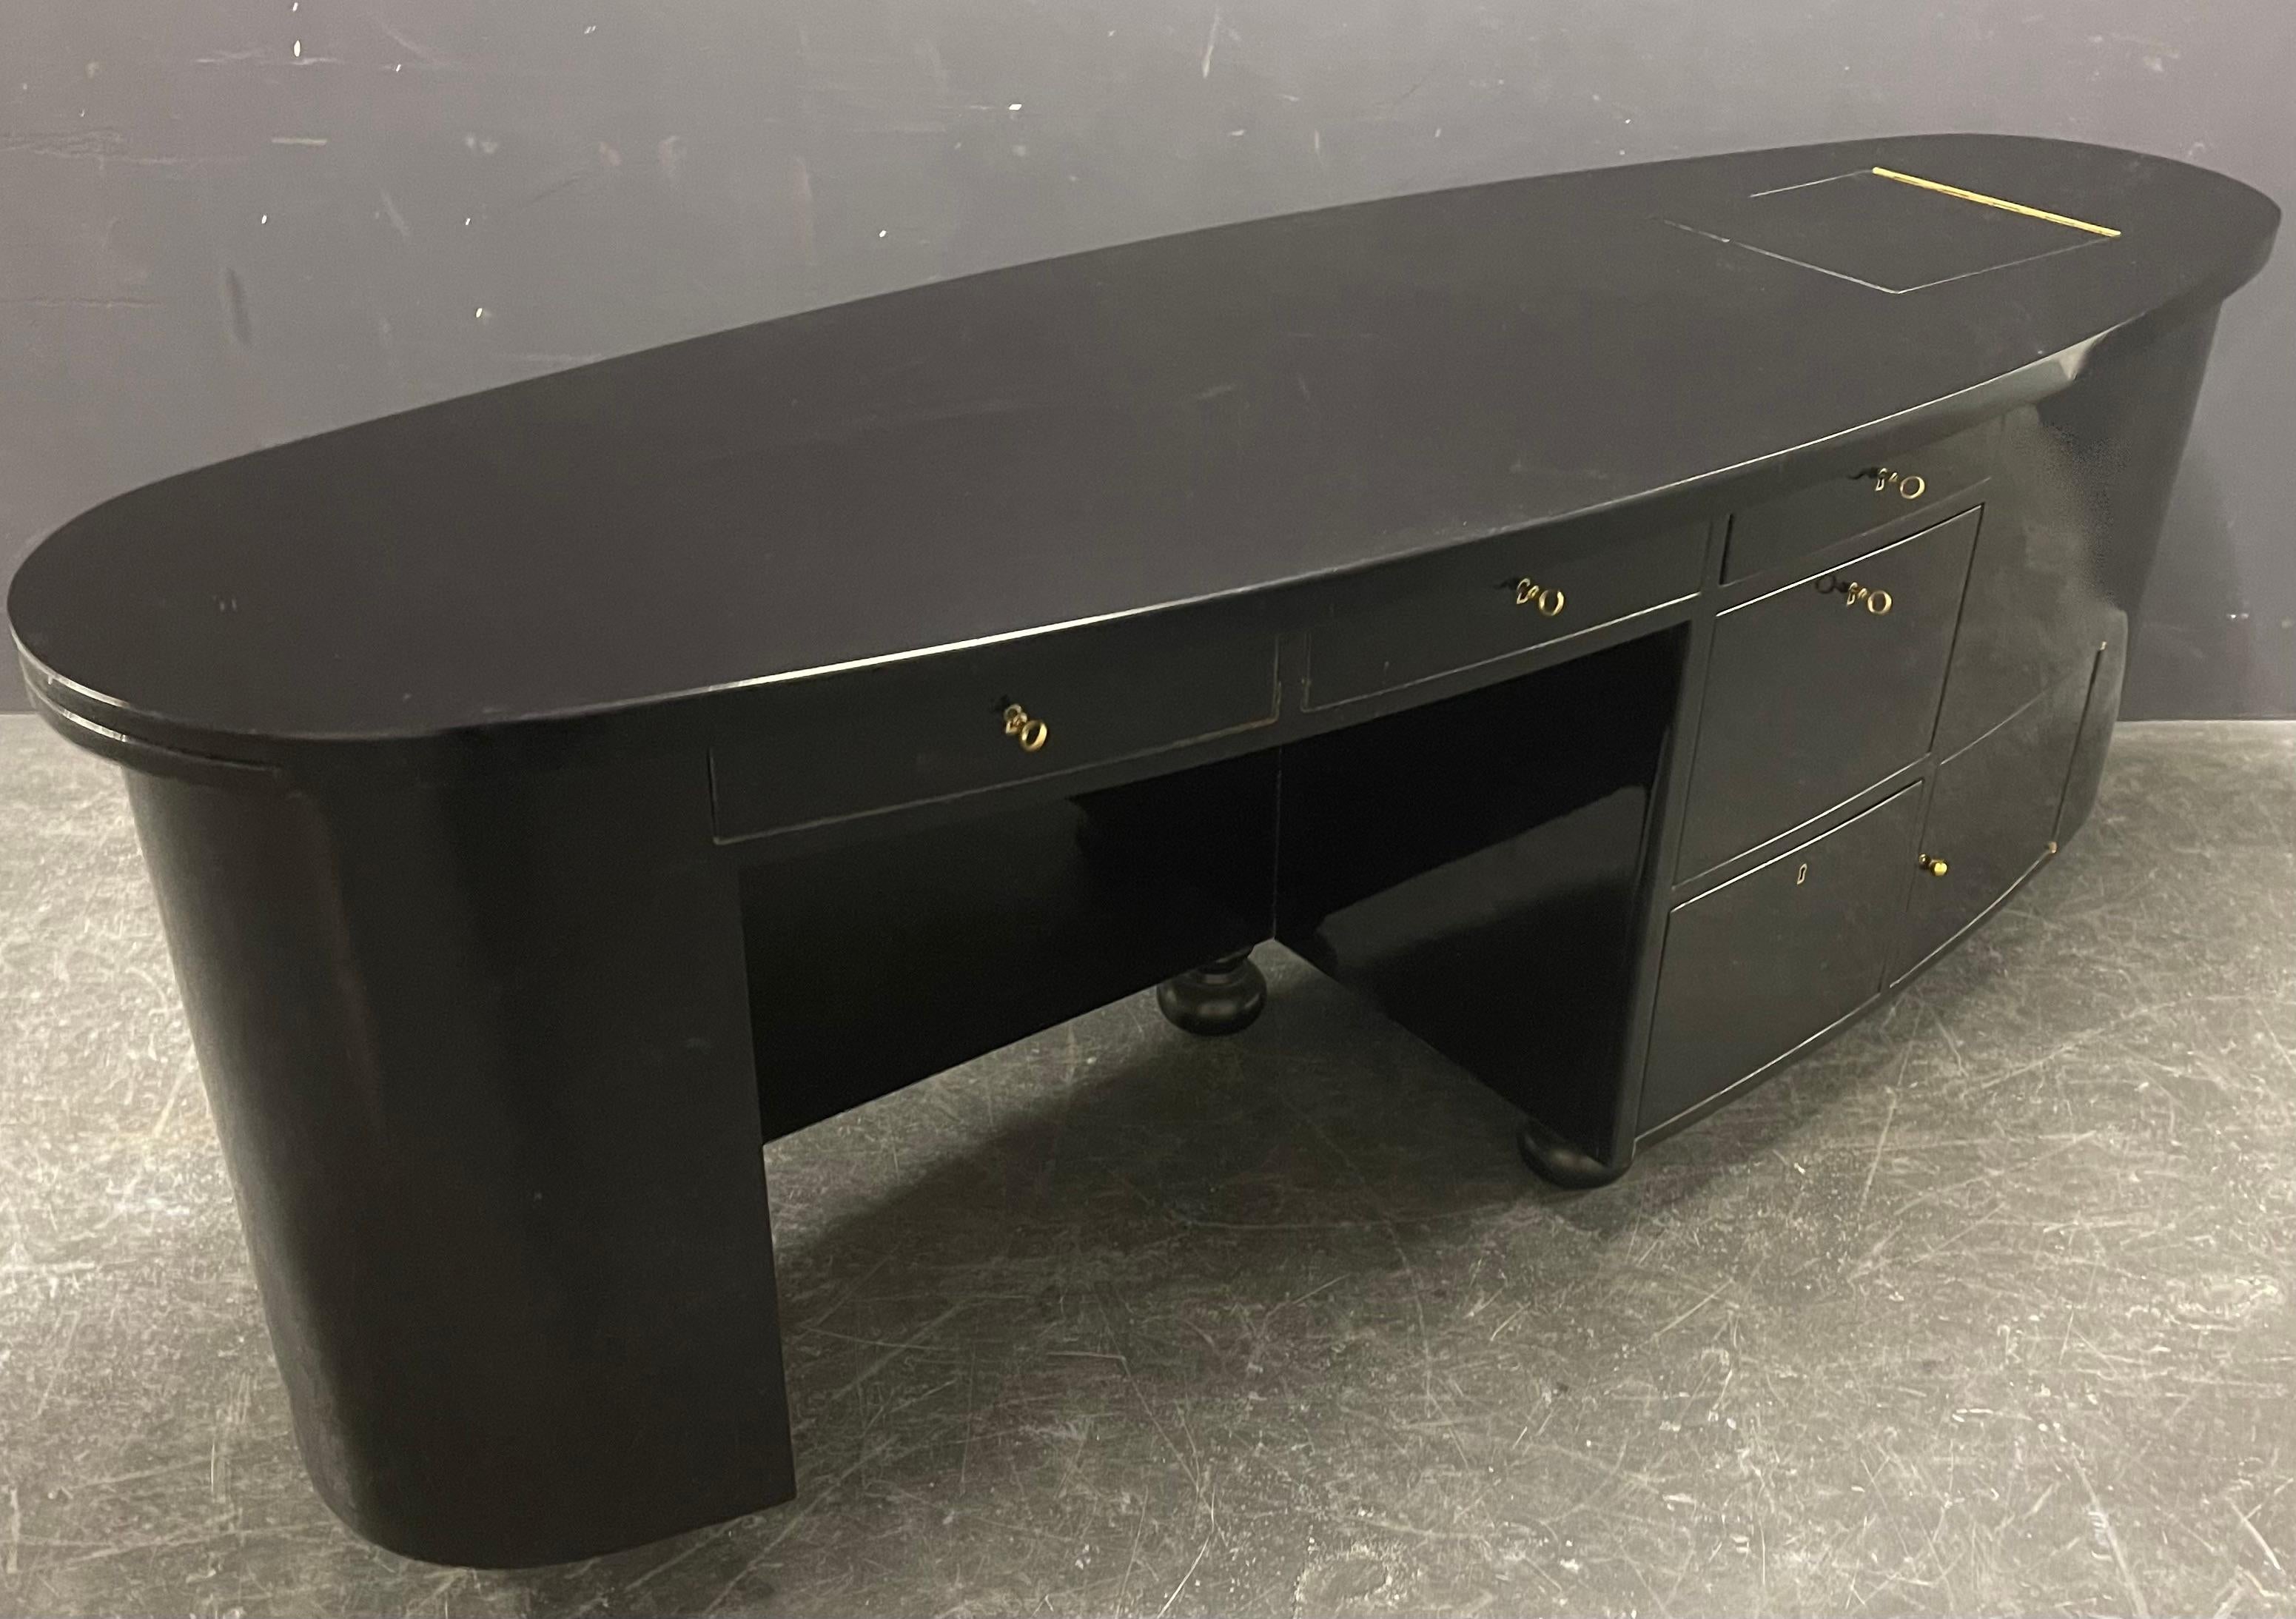 This desk is by far the most amazing piece i came along since many years. I saw it and was directly in love with the shape and all details. The dimensions are so special and it can be used everywhere in the middle of a room. As executive desk,